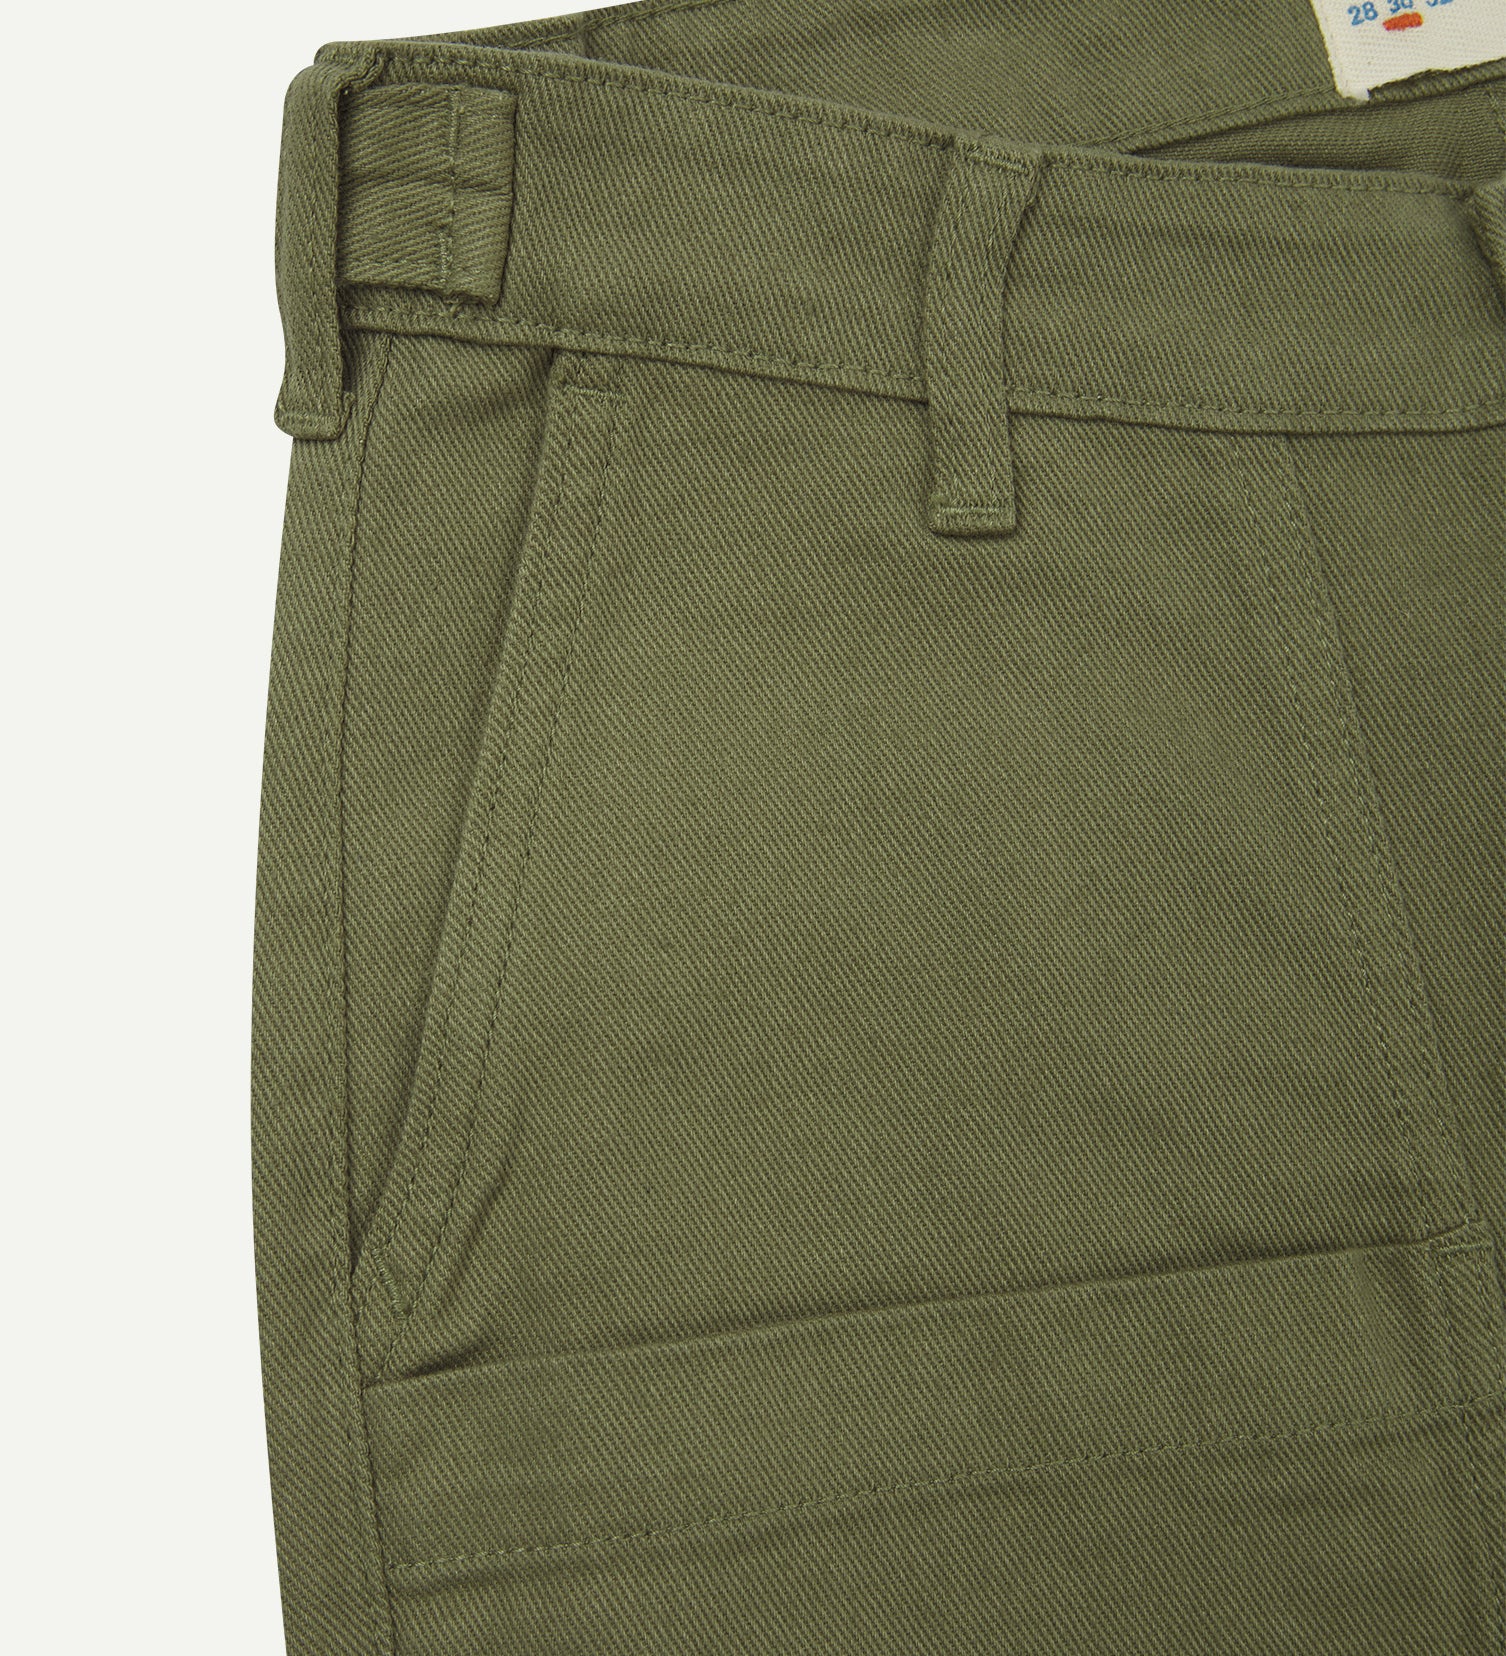 Close up shot of Uskees #5013 drill men's trousers showing pocket and waistband detail